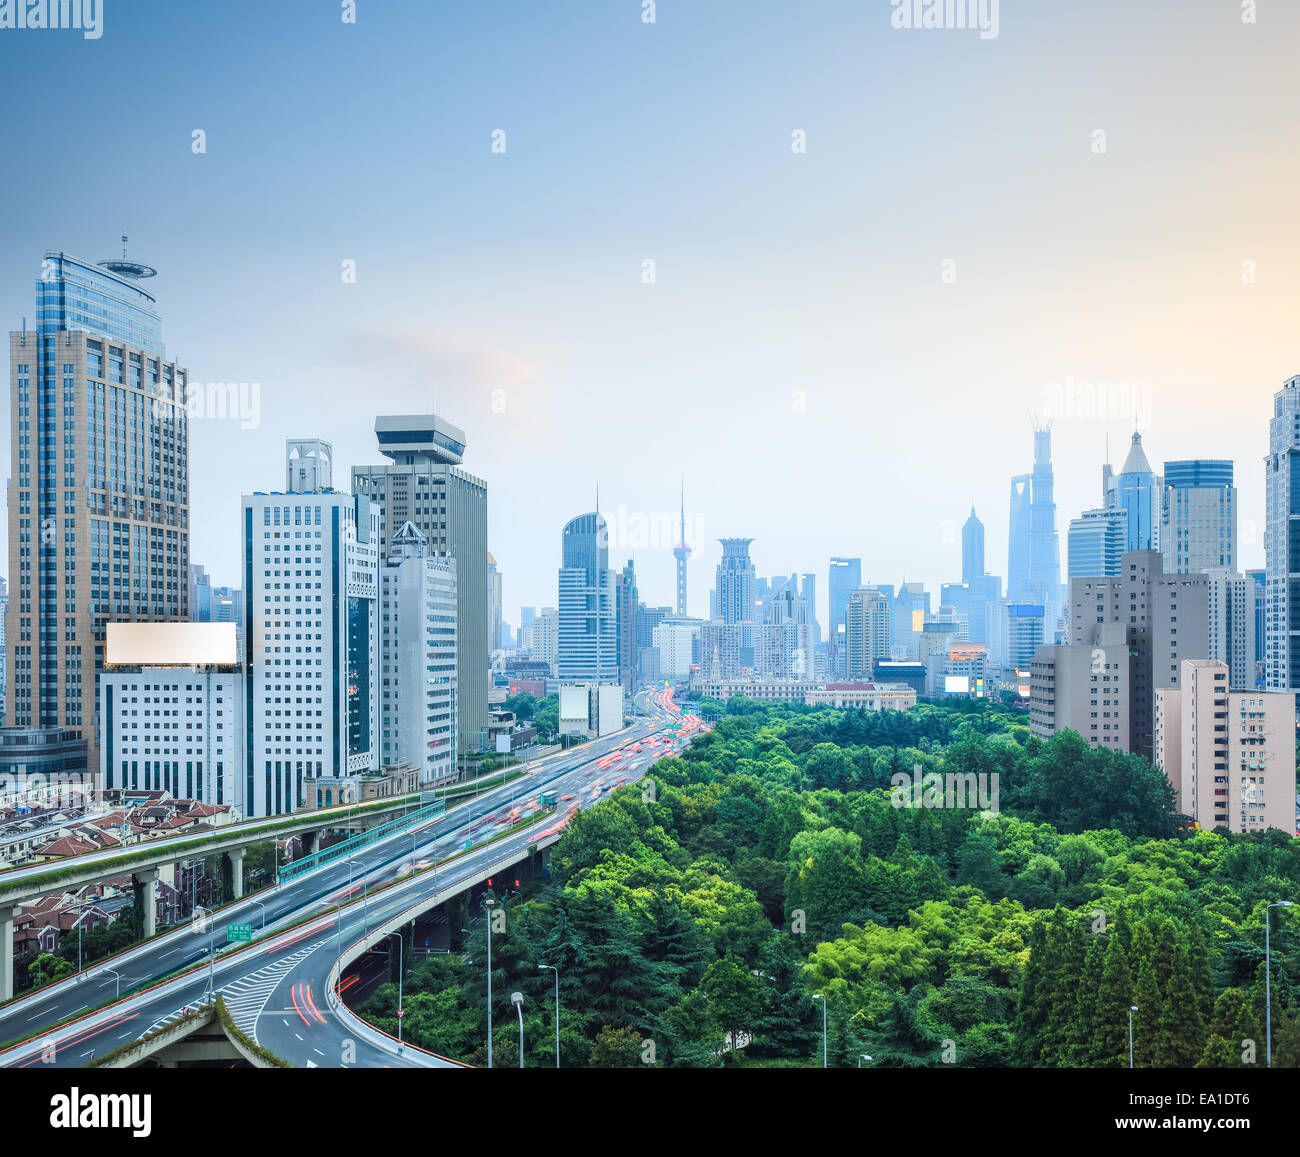 shanghai skyline and elevated road Stock Photo